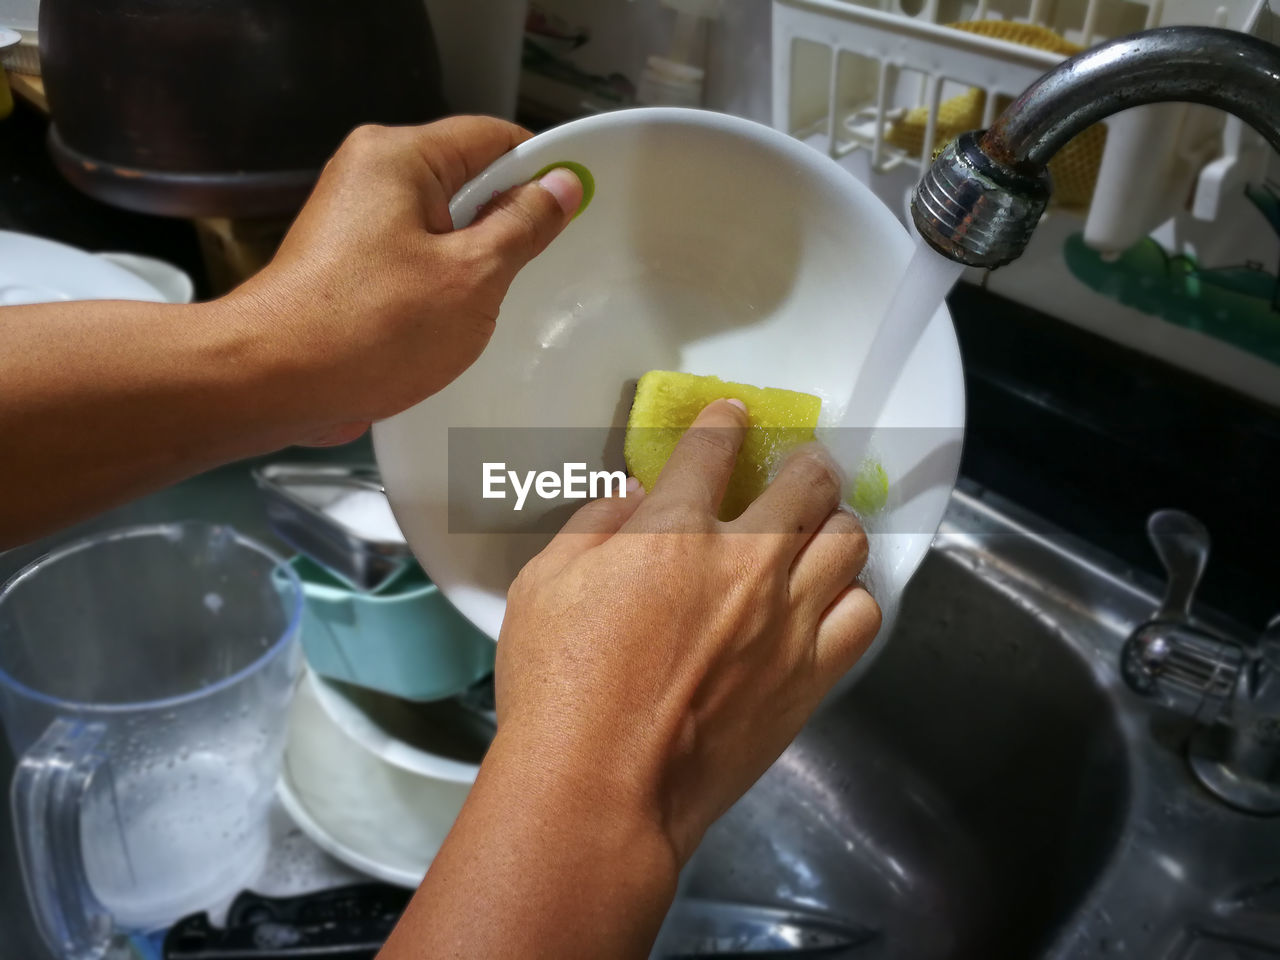 Person washing dishes in sink